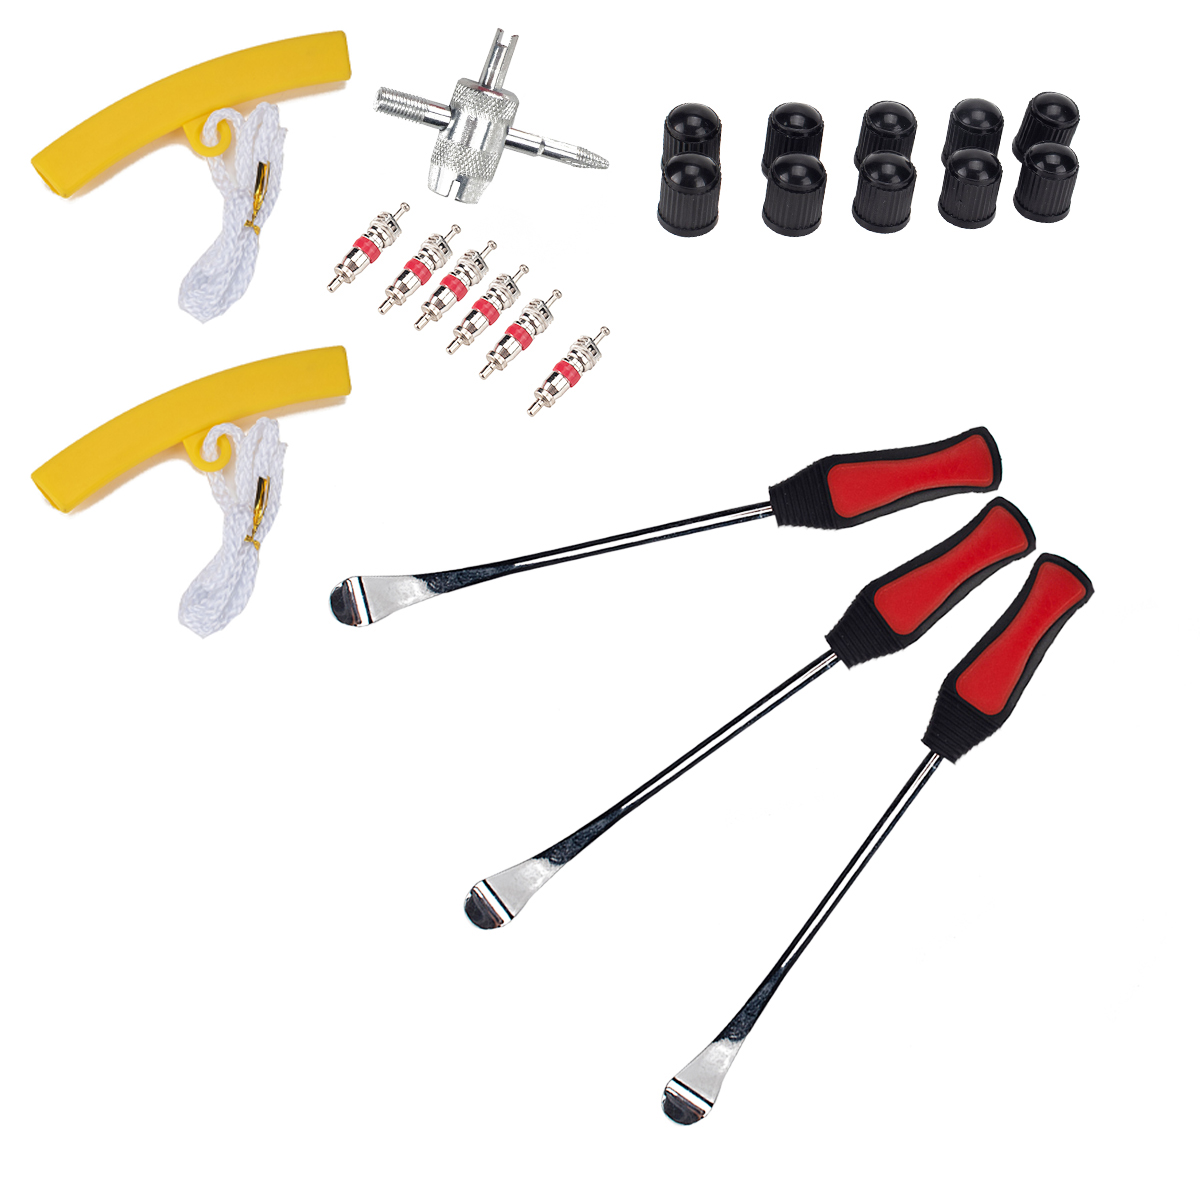 Tire Spoons Lever Motorcycle Dirt Bike Lawn Mower Tire Changing Tools with Bag A2981 (3 crowbars + 2 yellow tire protective sleeves + 10 valve caps + 1 four-in-one repair tool + 6 valve cores)